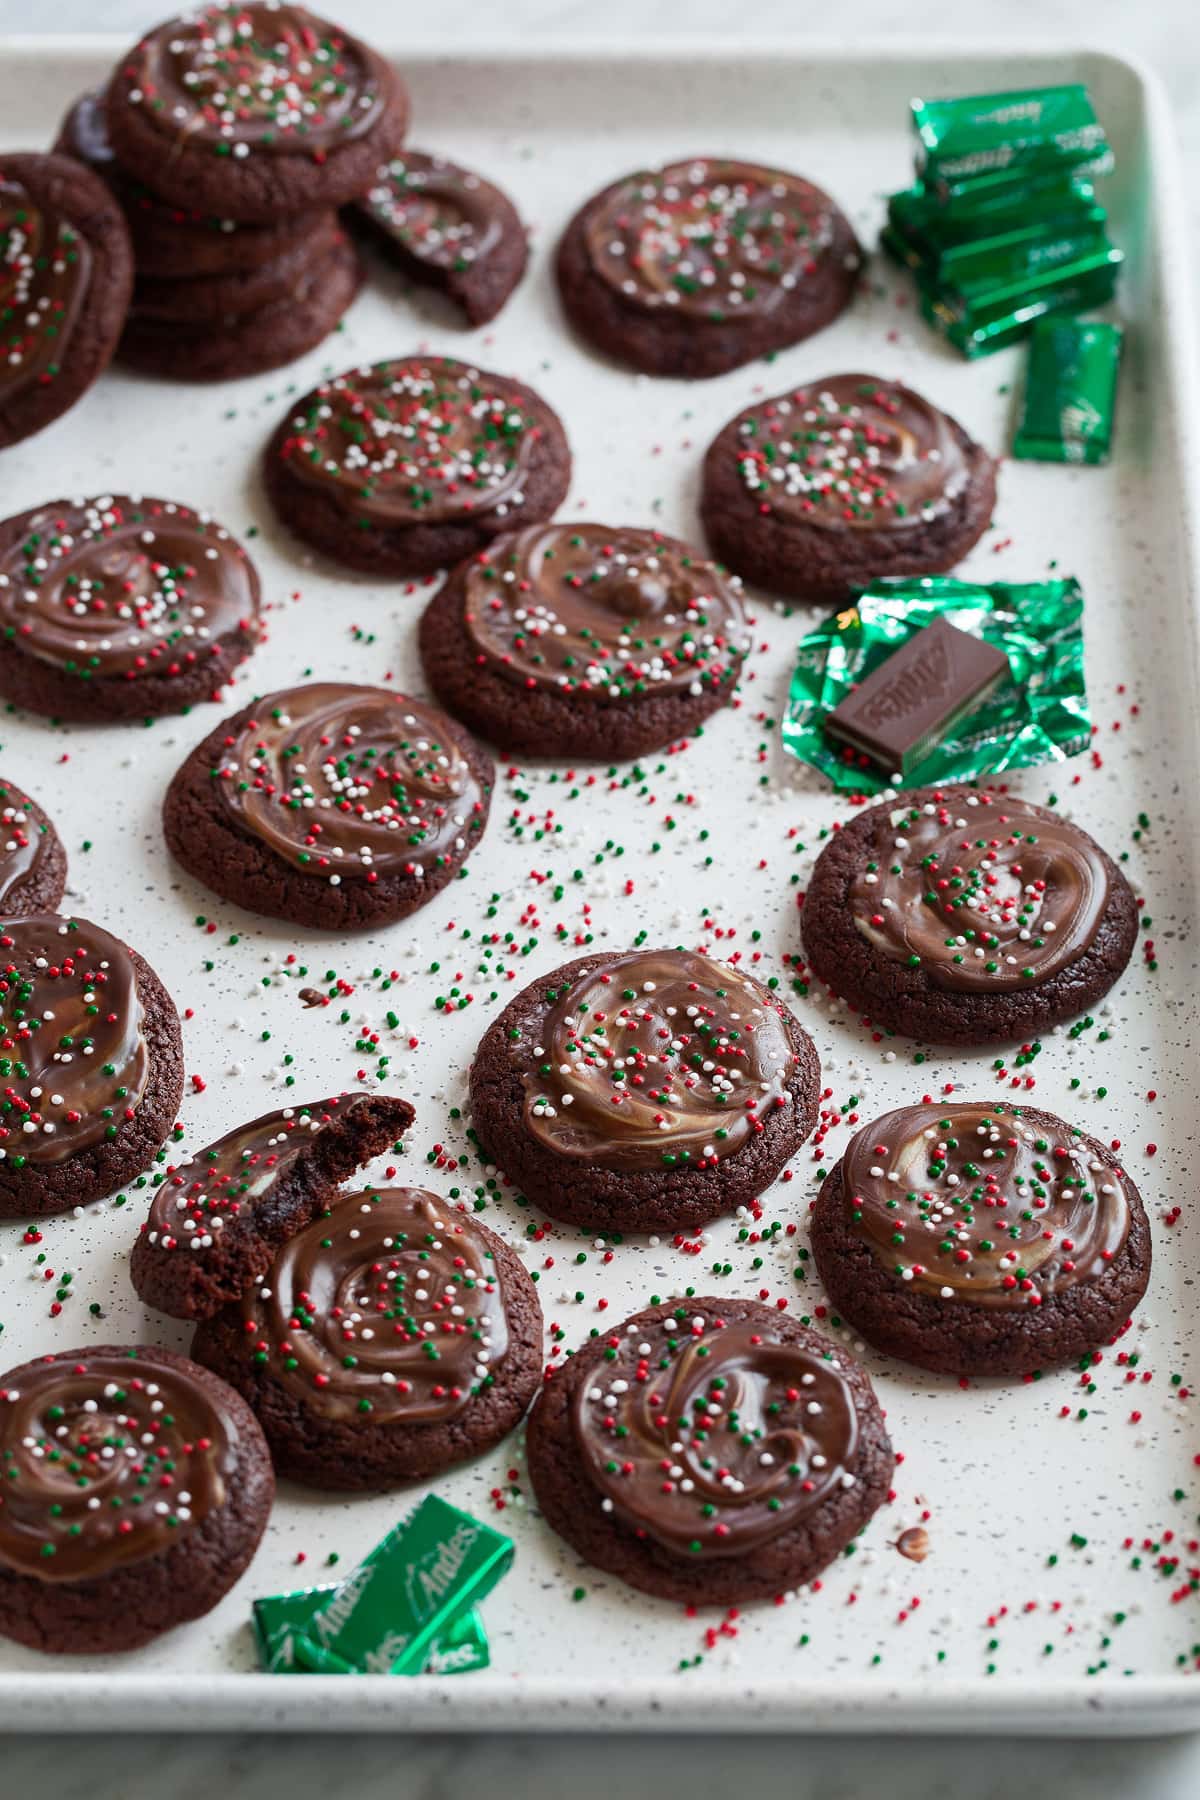 Chocolate cookies with melted andes mints on top.